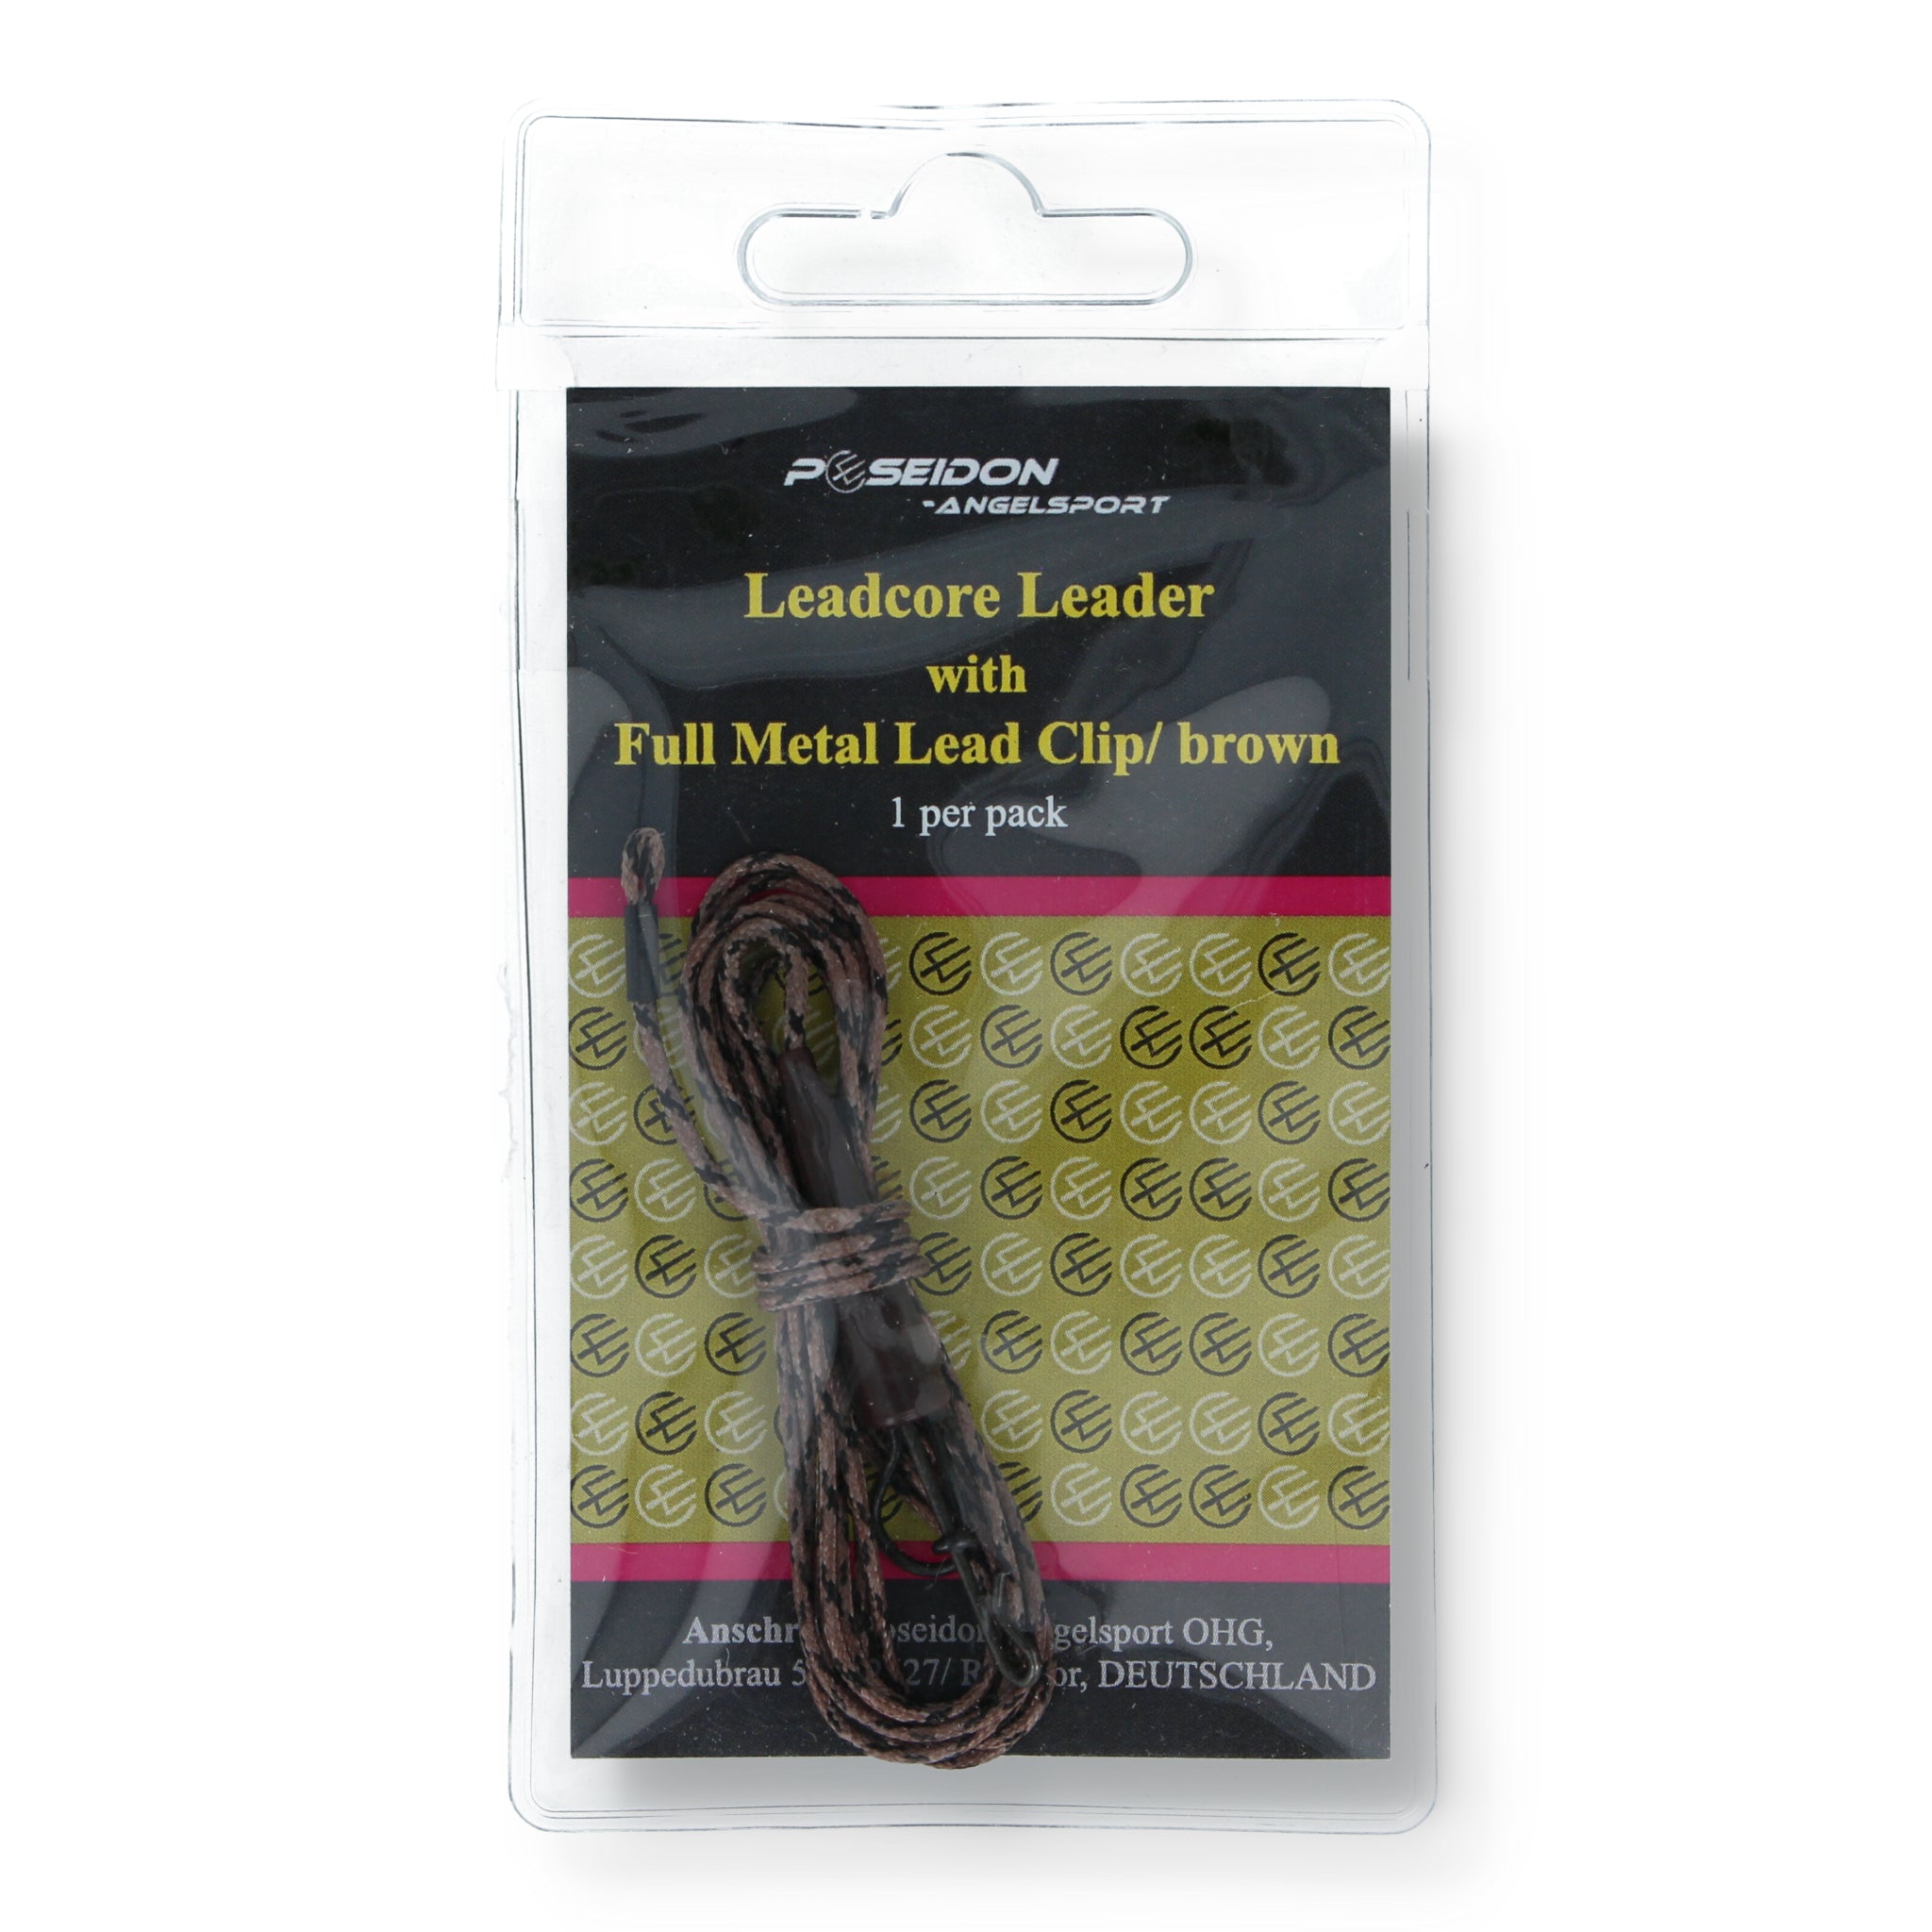 Poseidon Angelsport Leadcore Leader with Full Metal Lead Clip